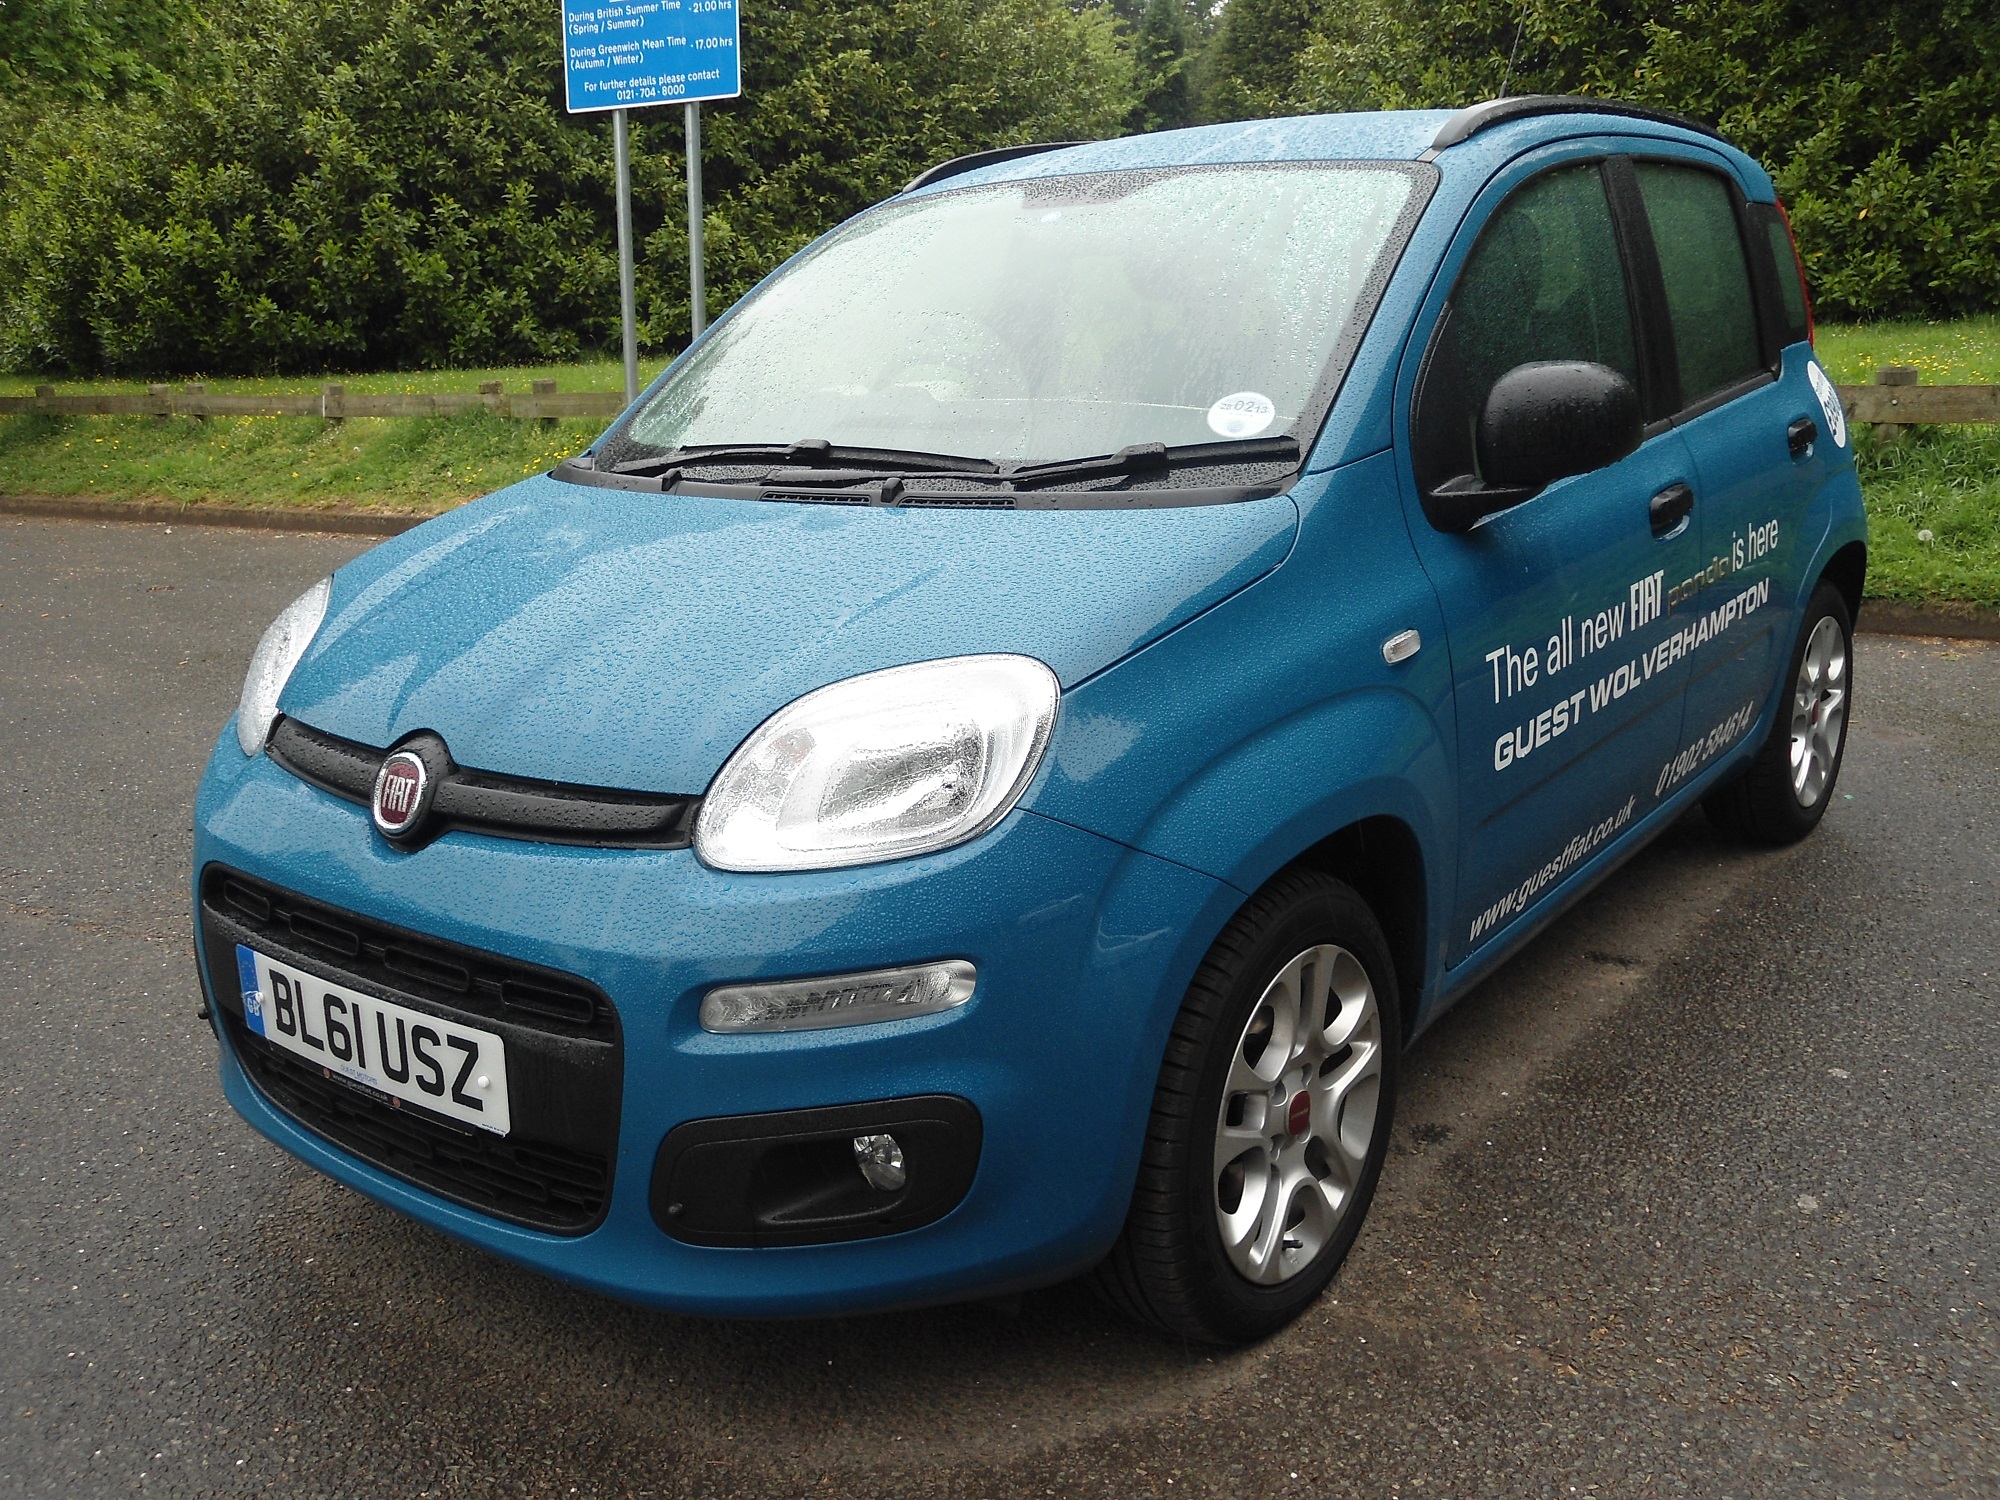 bedenken hardware wortel New & Used Nationwide UK Car Finders | Deals & Advice plus Road Tests | 2012  Fiat Panda "Value priced, Finest feeling" test review by Nick Johnson -  MyCarCoachMyCarCoach